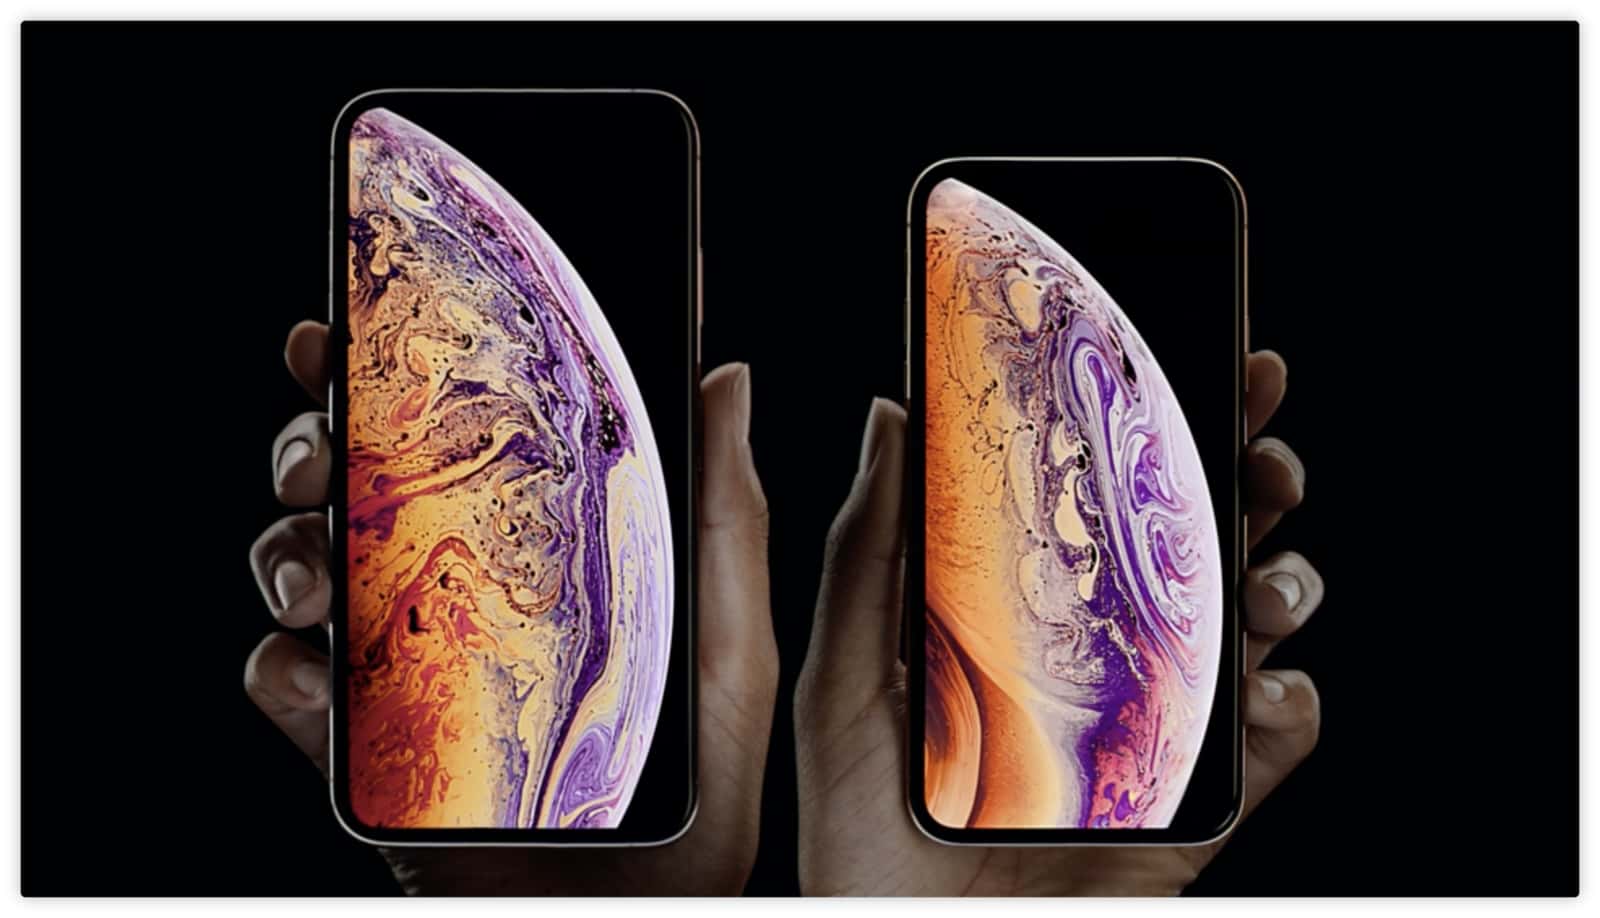 iphone-xs-iphone-xs-disadvantages-problems-pros-cons